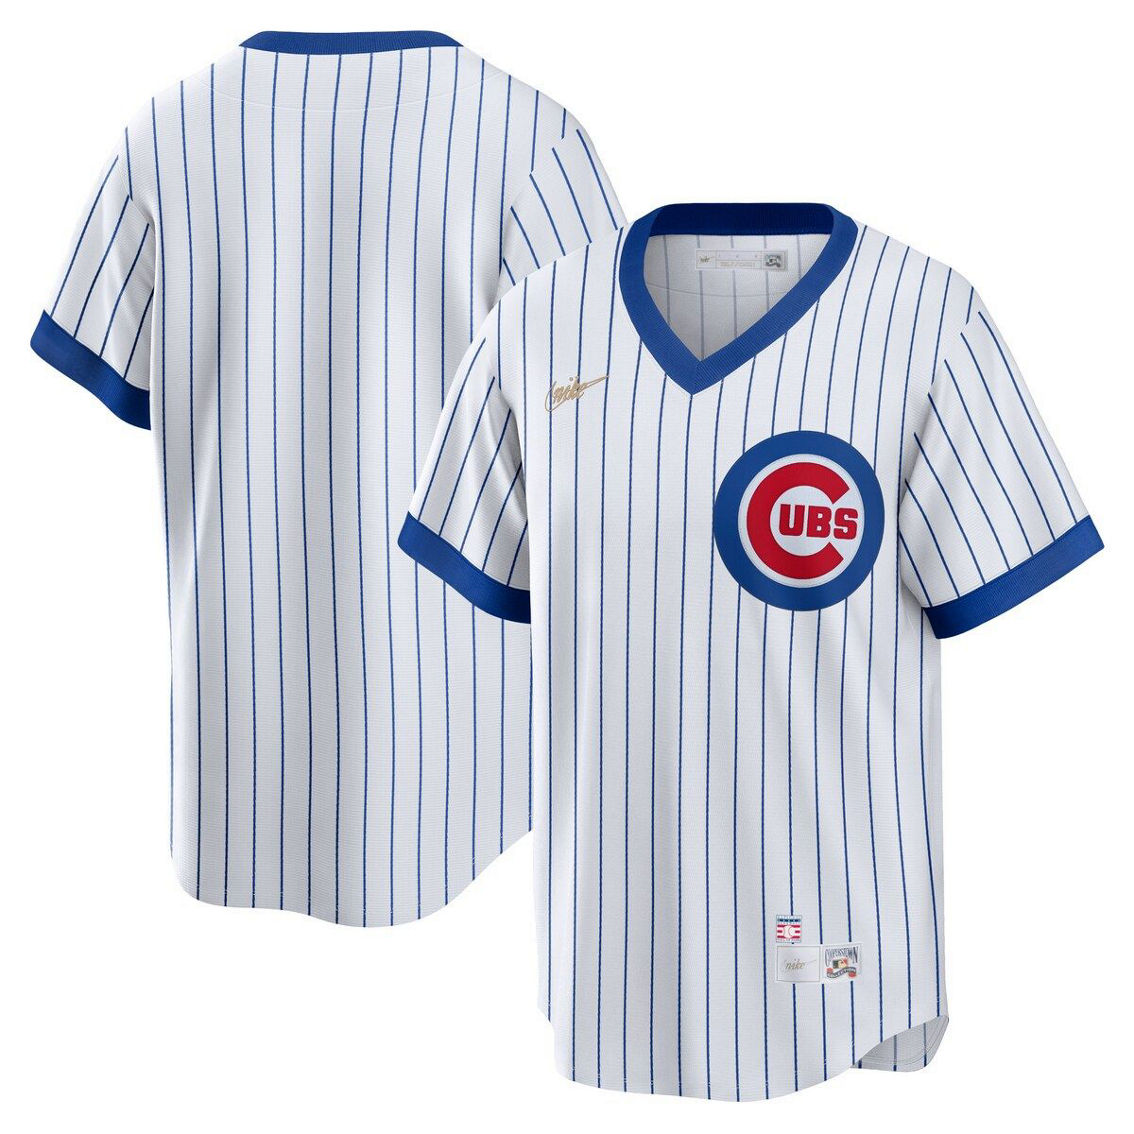 Nike Men's White Chicago Cubs Home Cooperstown Collection Team Jersey - Image 2 of 4